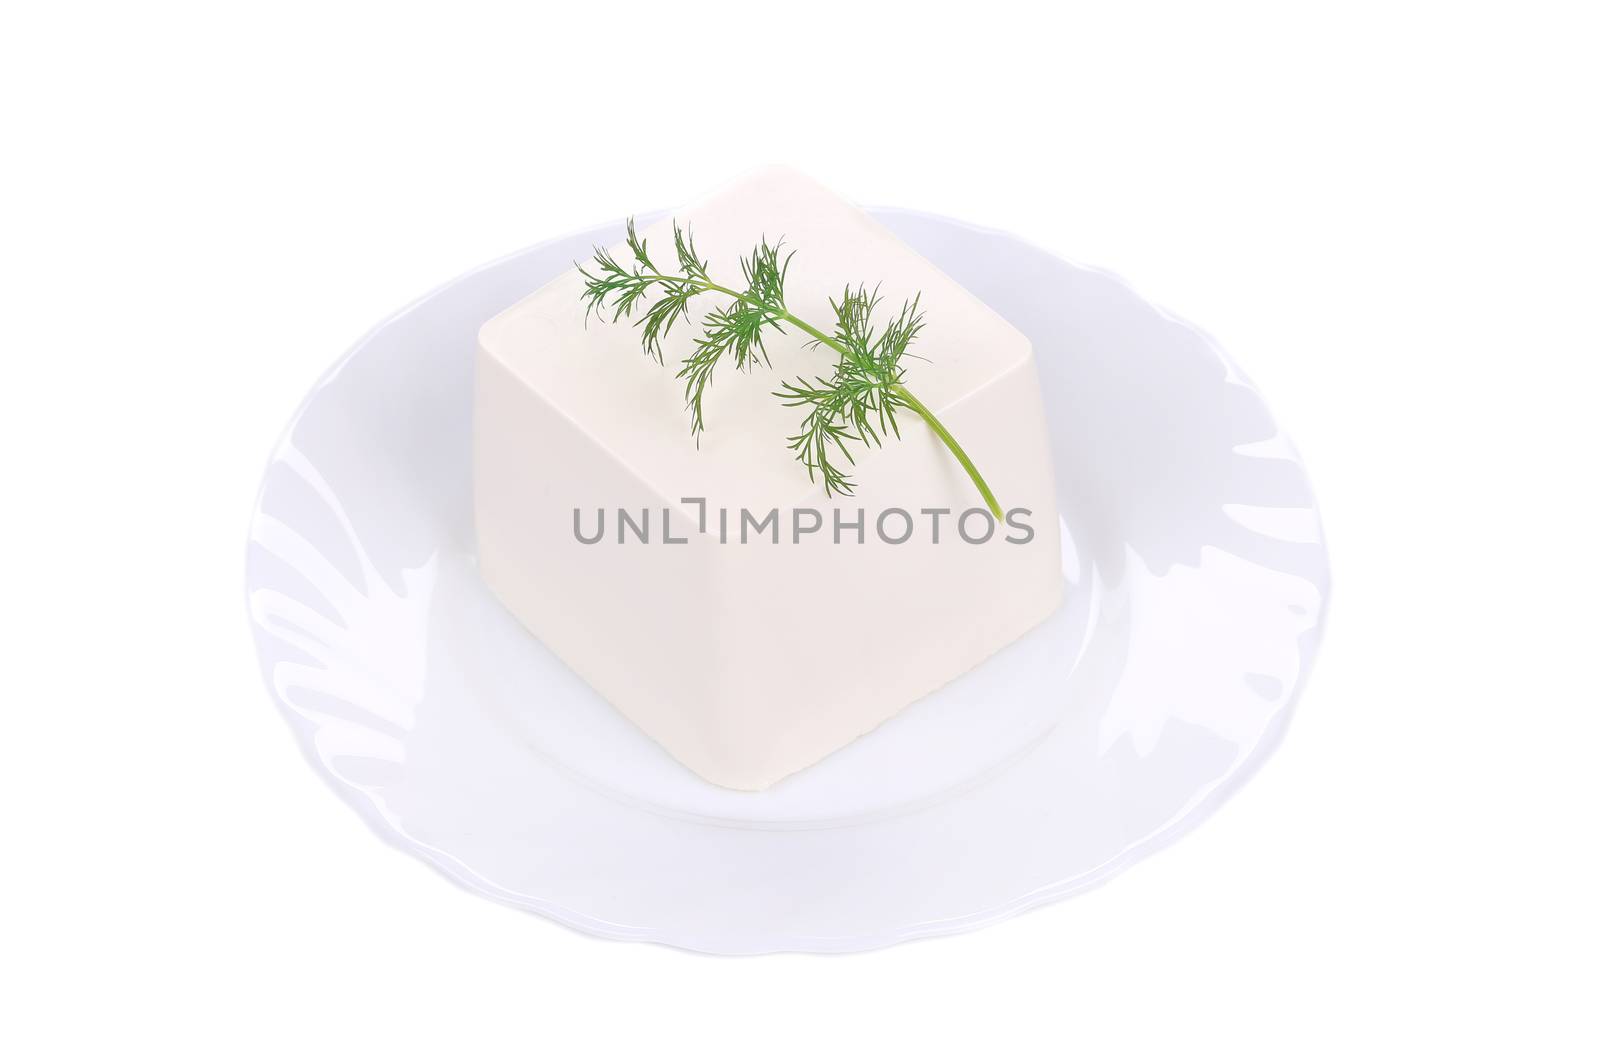 Feta cheese with dill herb. by indigolotos